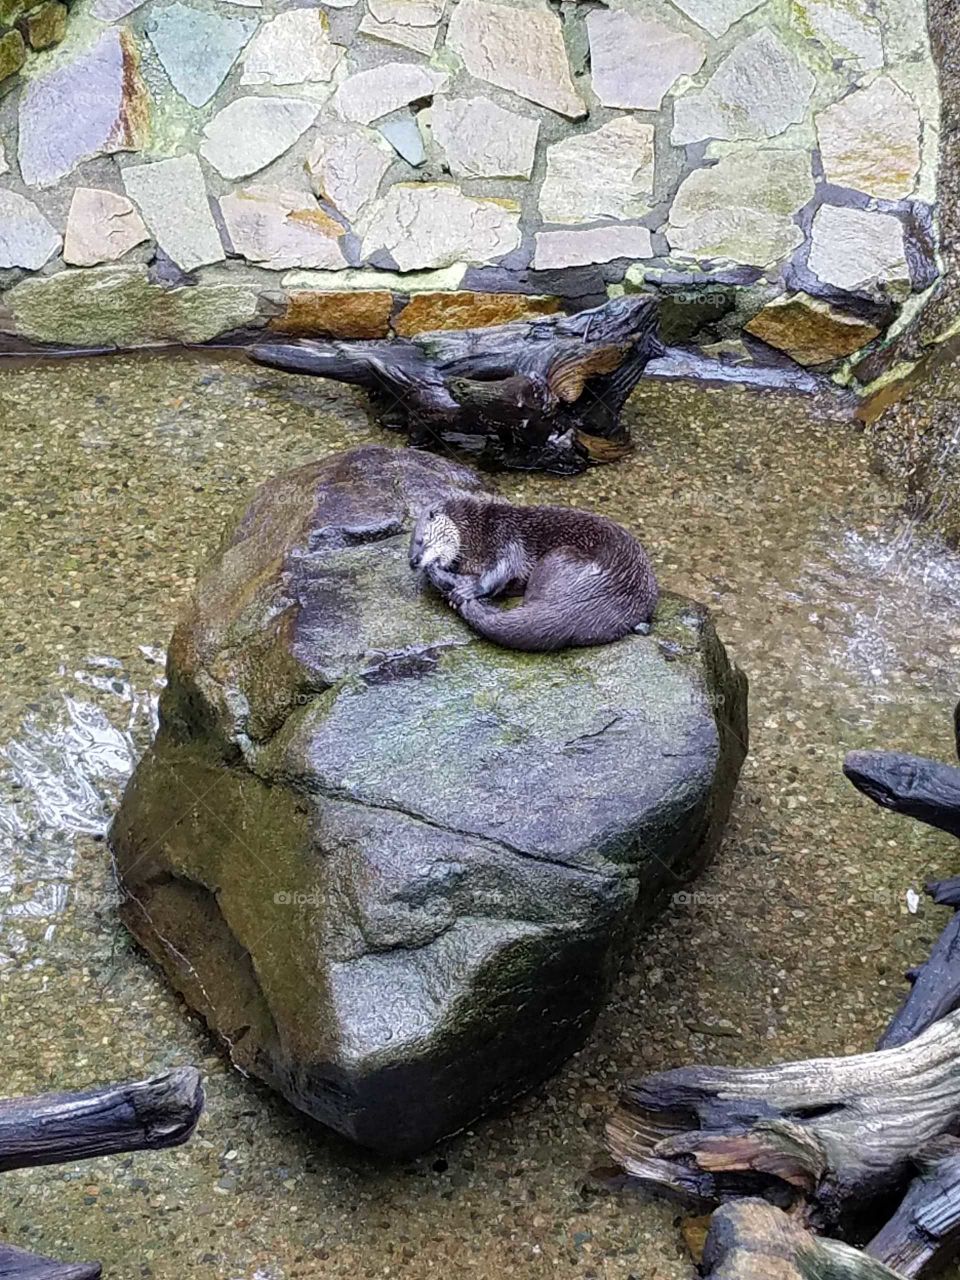 Otter sucking on his tail to nap.